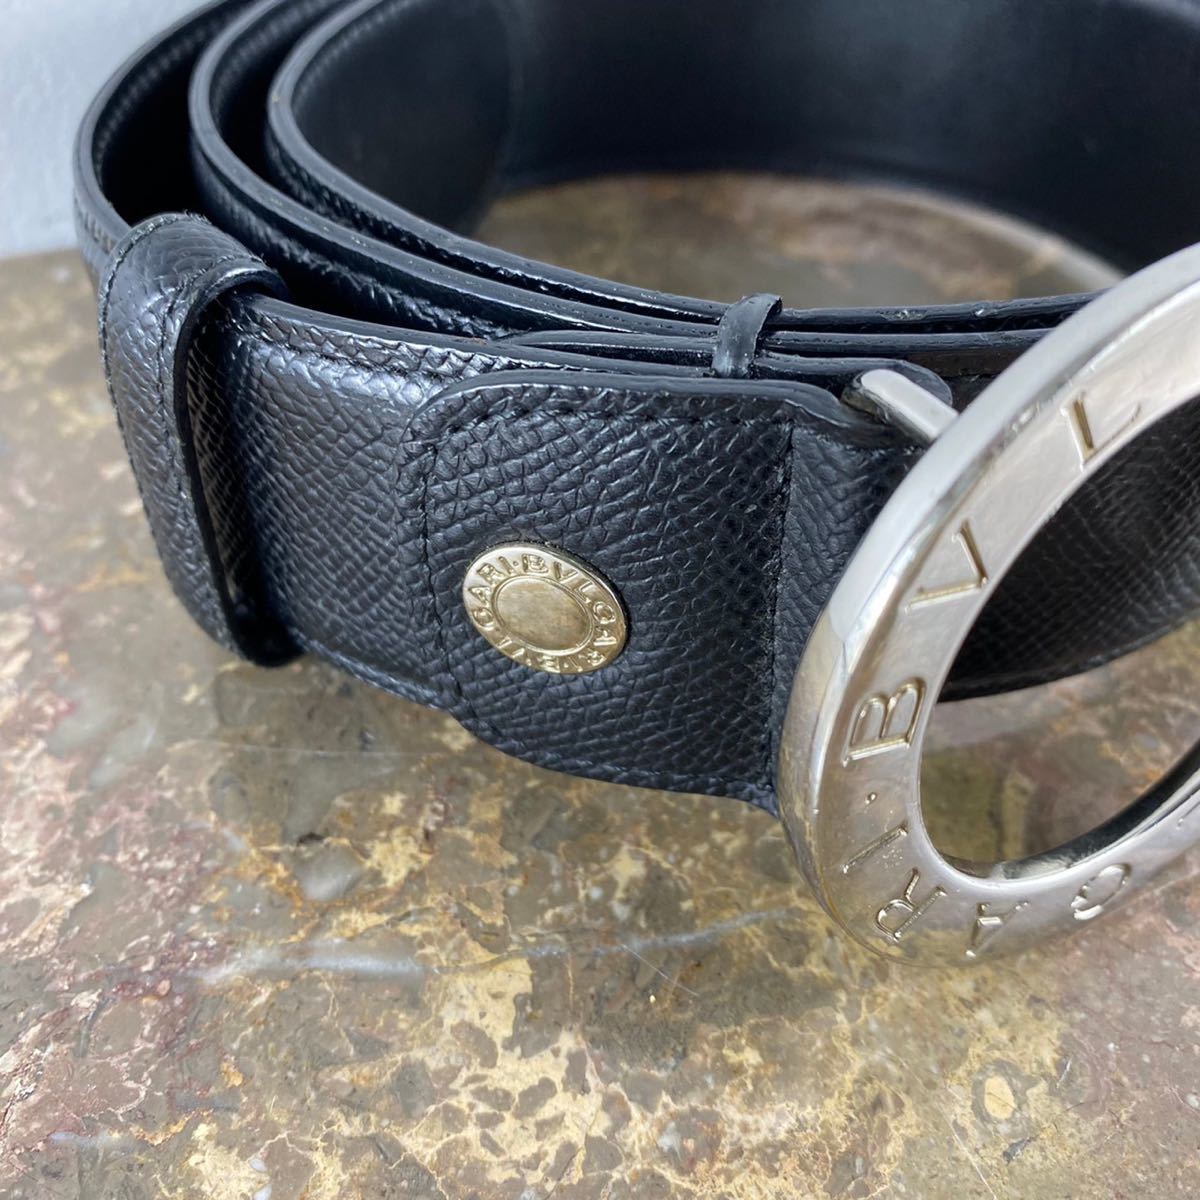 BVLGARI 105/42 CIRCLE LOGO BUCKLE LEATHER BELT MADE IN ITALY/ブルガリサークルロゴ